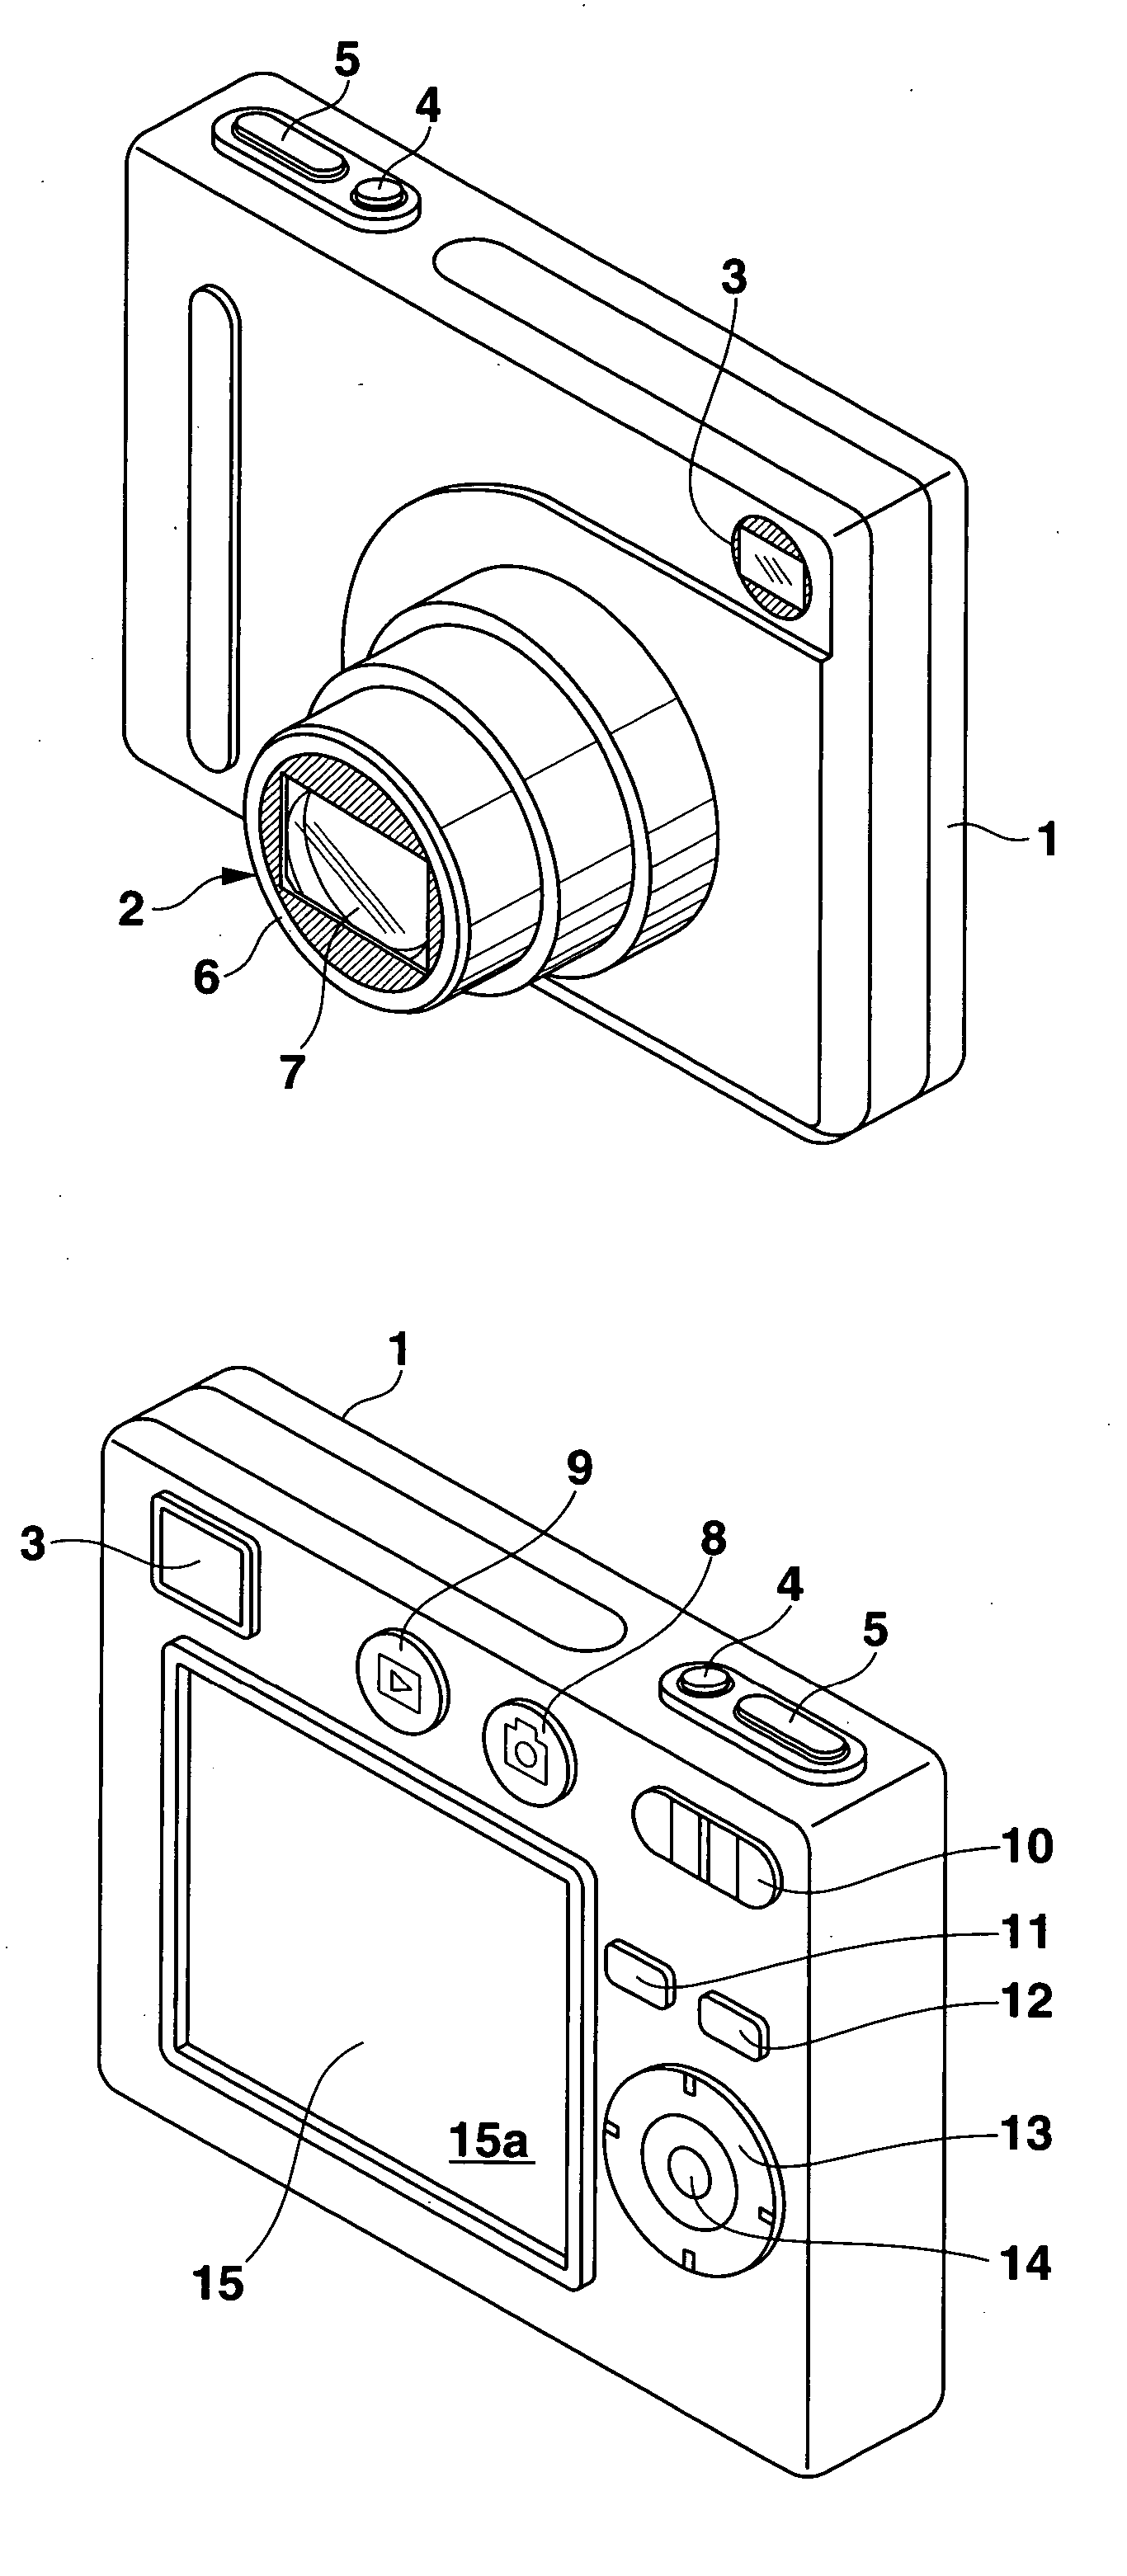 Image capturing apparatus with zoom function